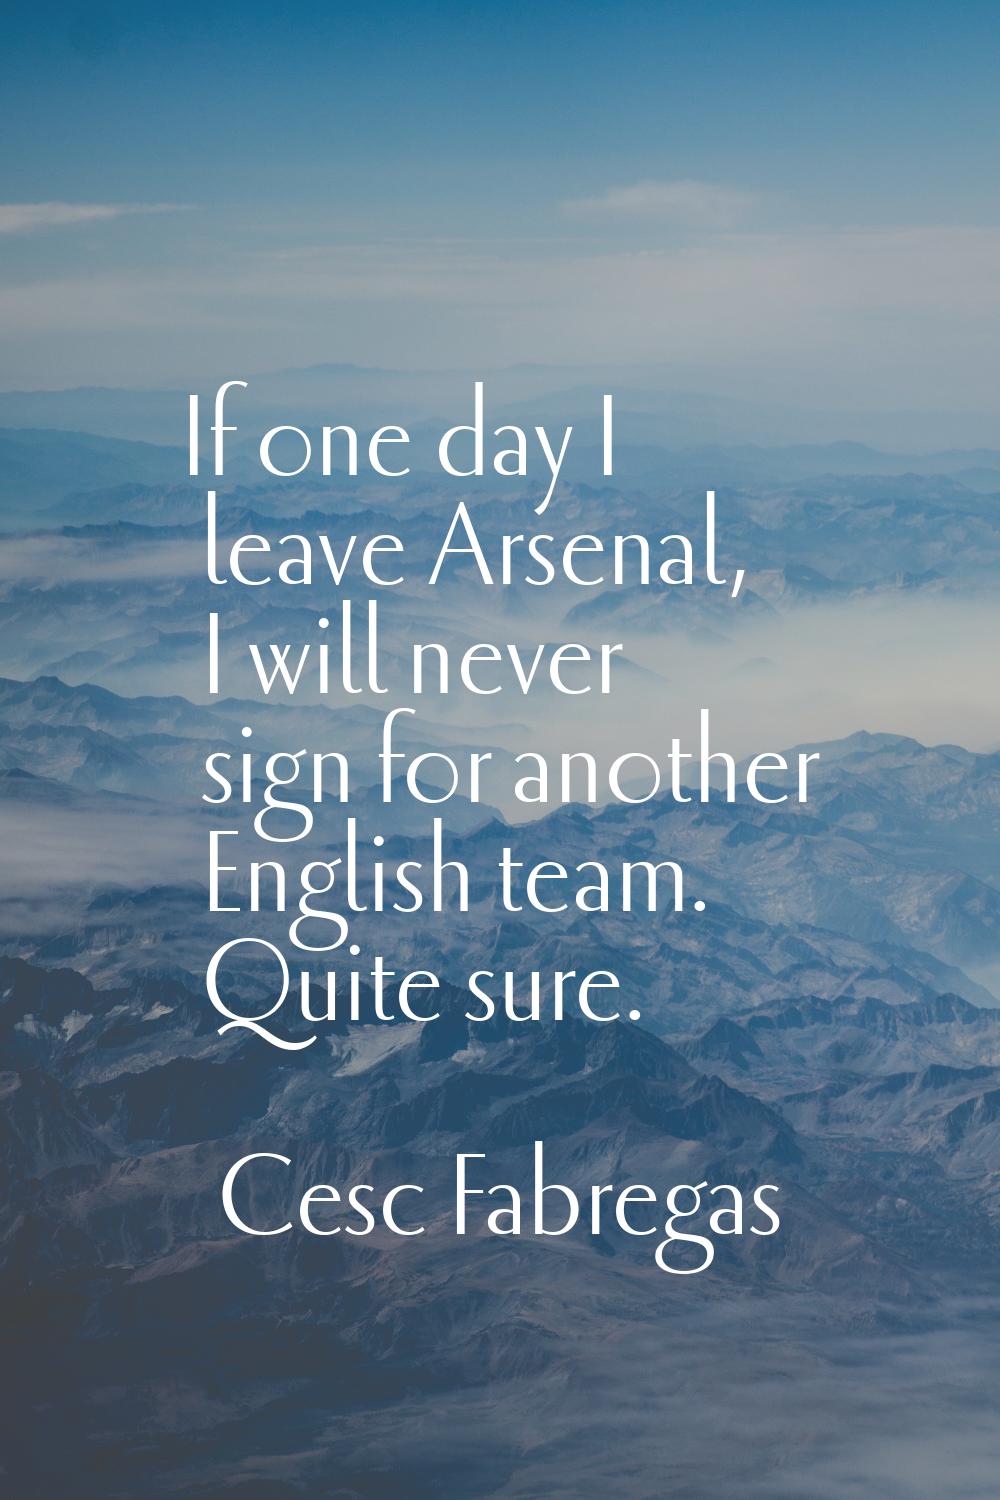 If one day I leave Arsenal, I will never sign for another English team. Quite sure.